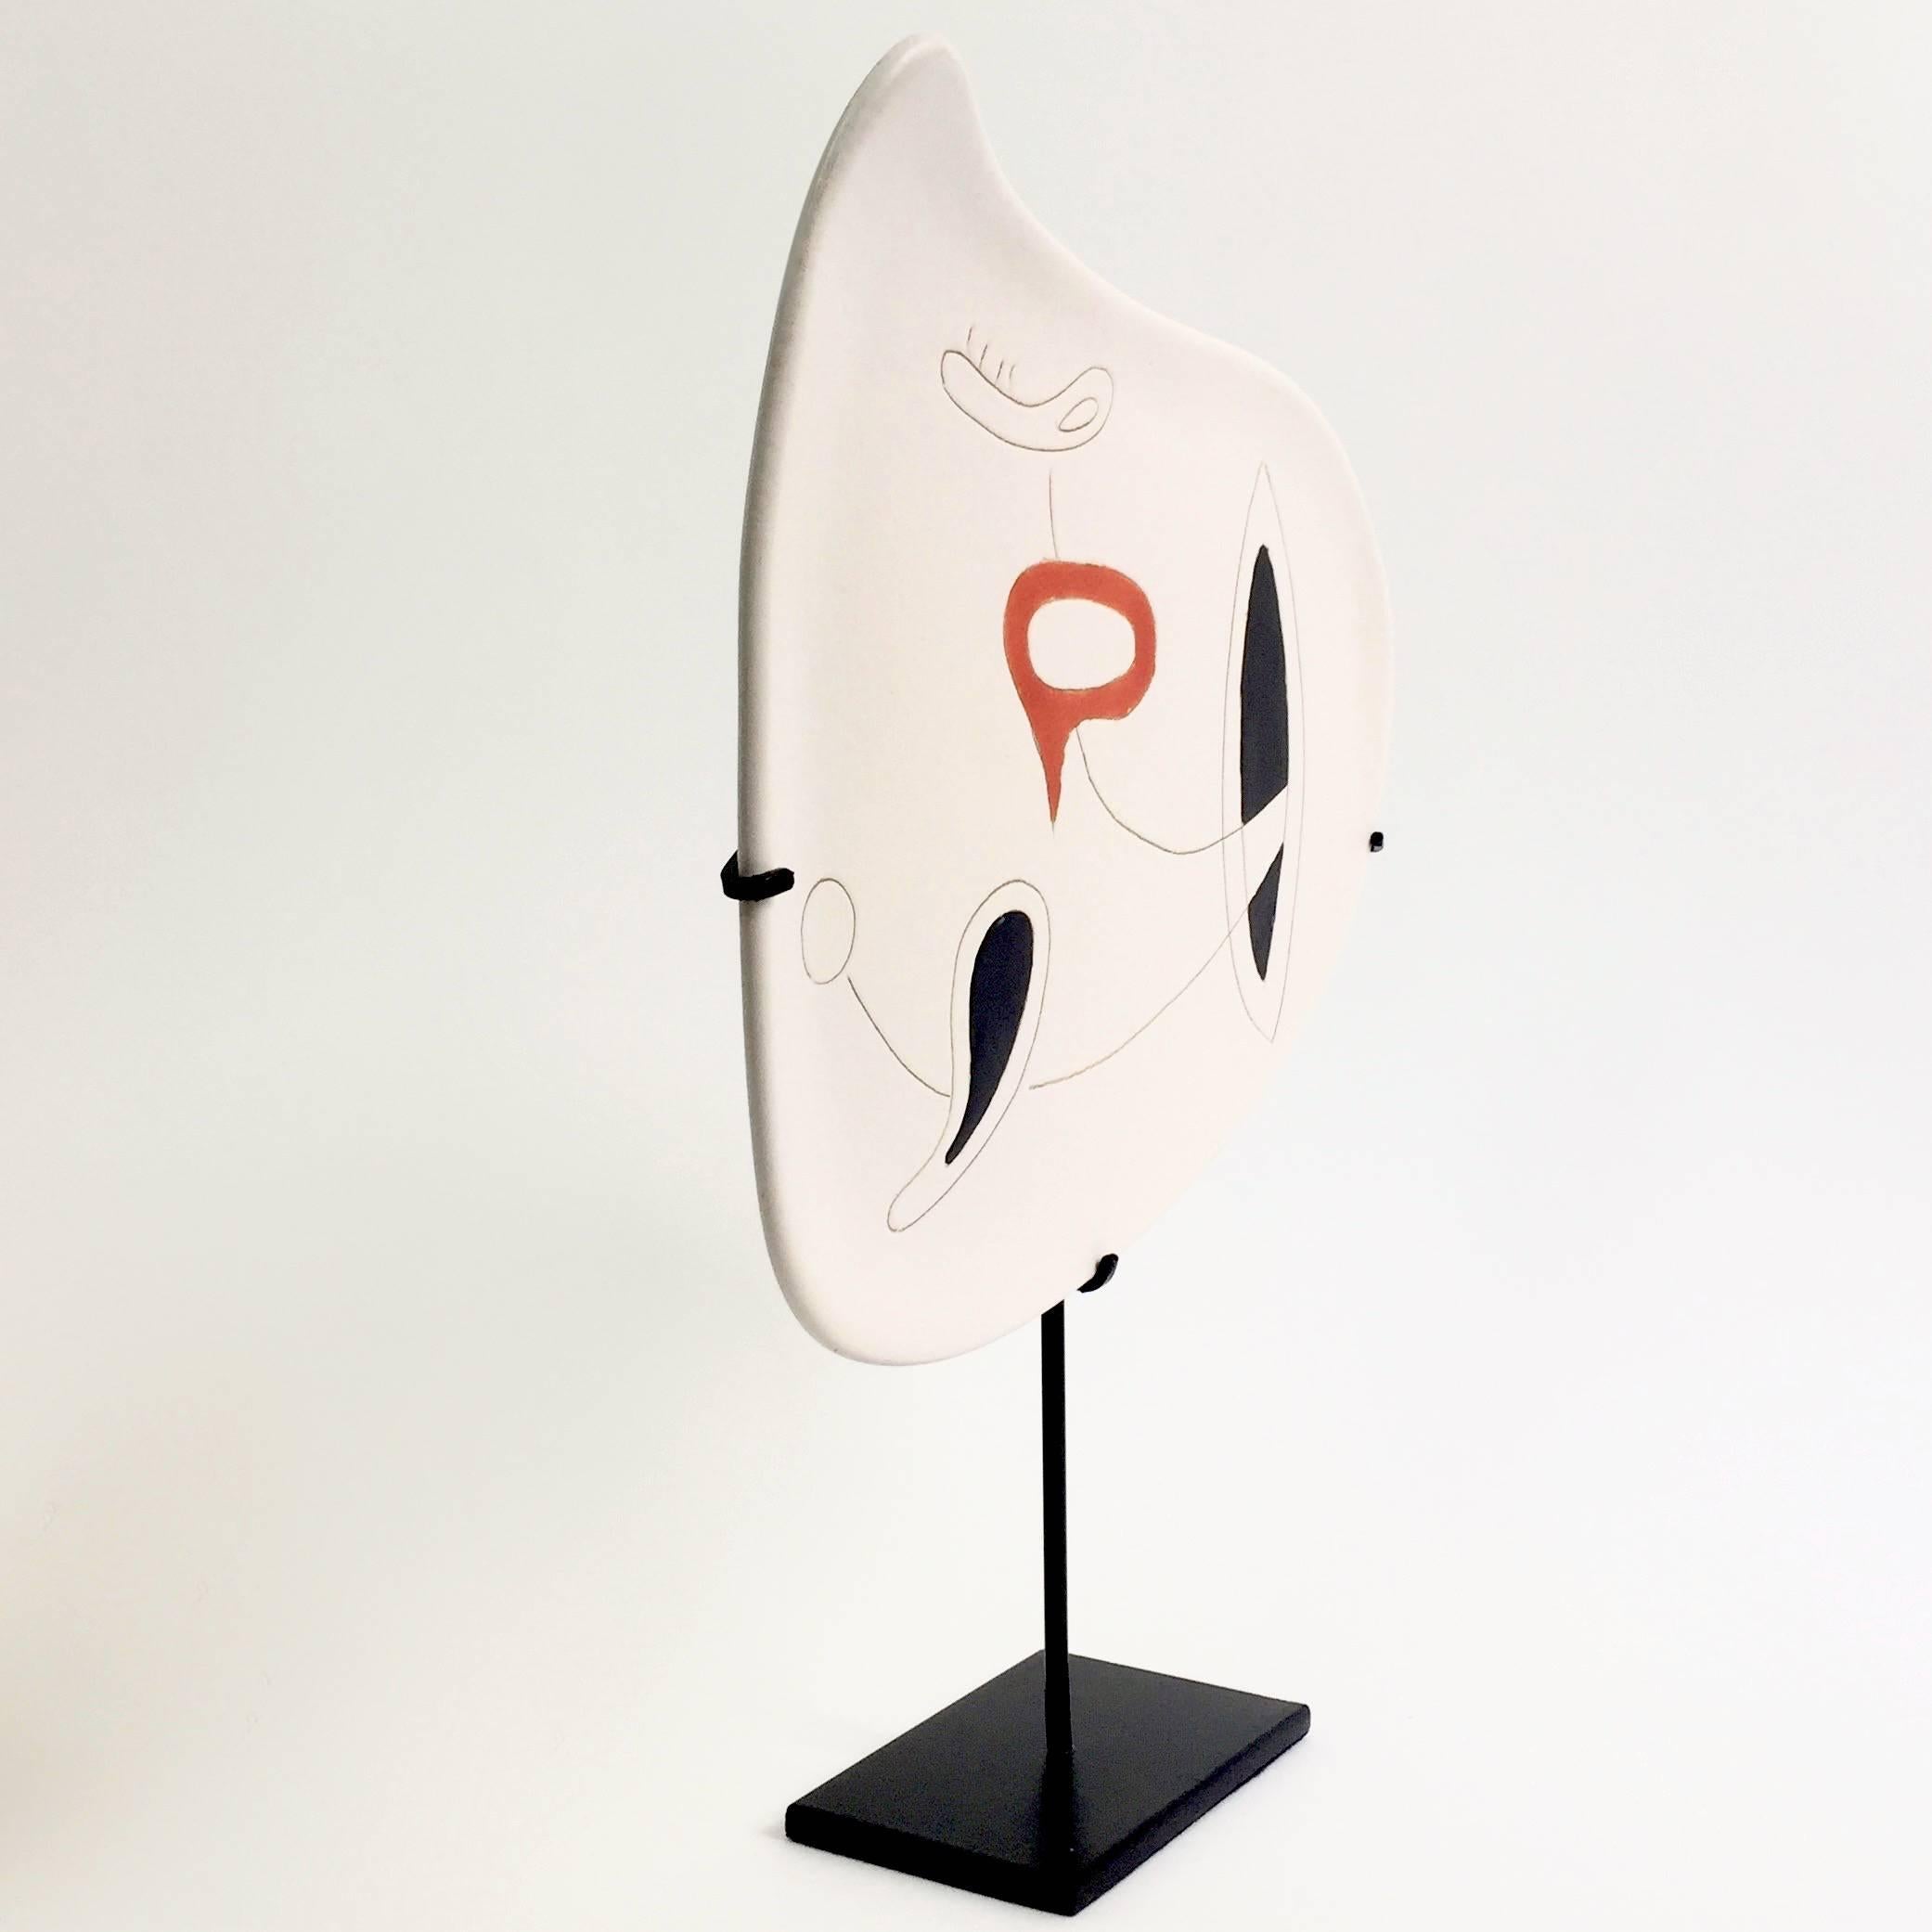 An organic shaped earthenware dish glazed in white with abstract and geometric decoration engraved and over-glazed in shinny black and orange-red. 

Typical Mid-Century Modern abstract and geometric design, reminiscent of Joan Miro´ or Calder